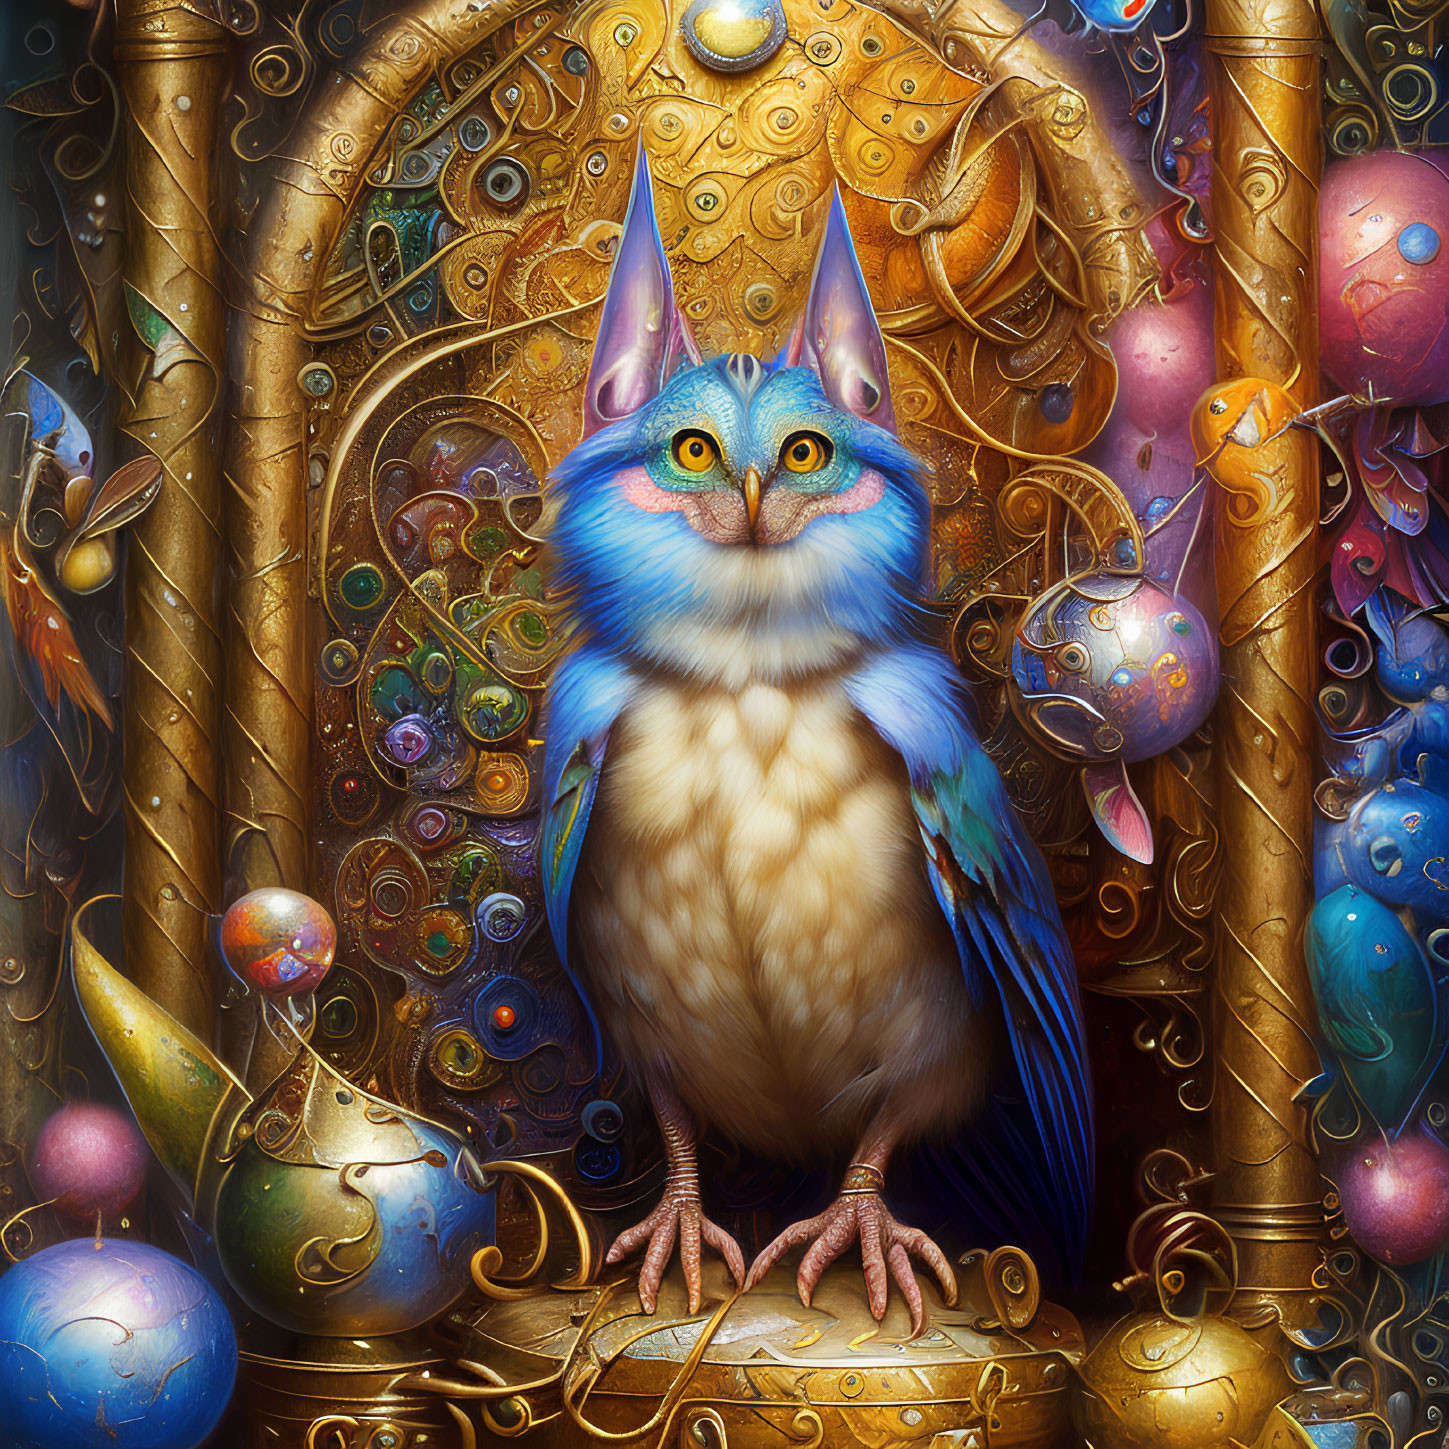 Colorful anthropomorphic owl painting with blue feathers and golden patterns